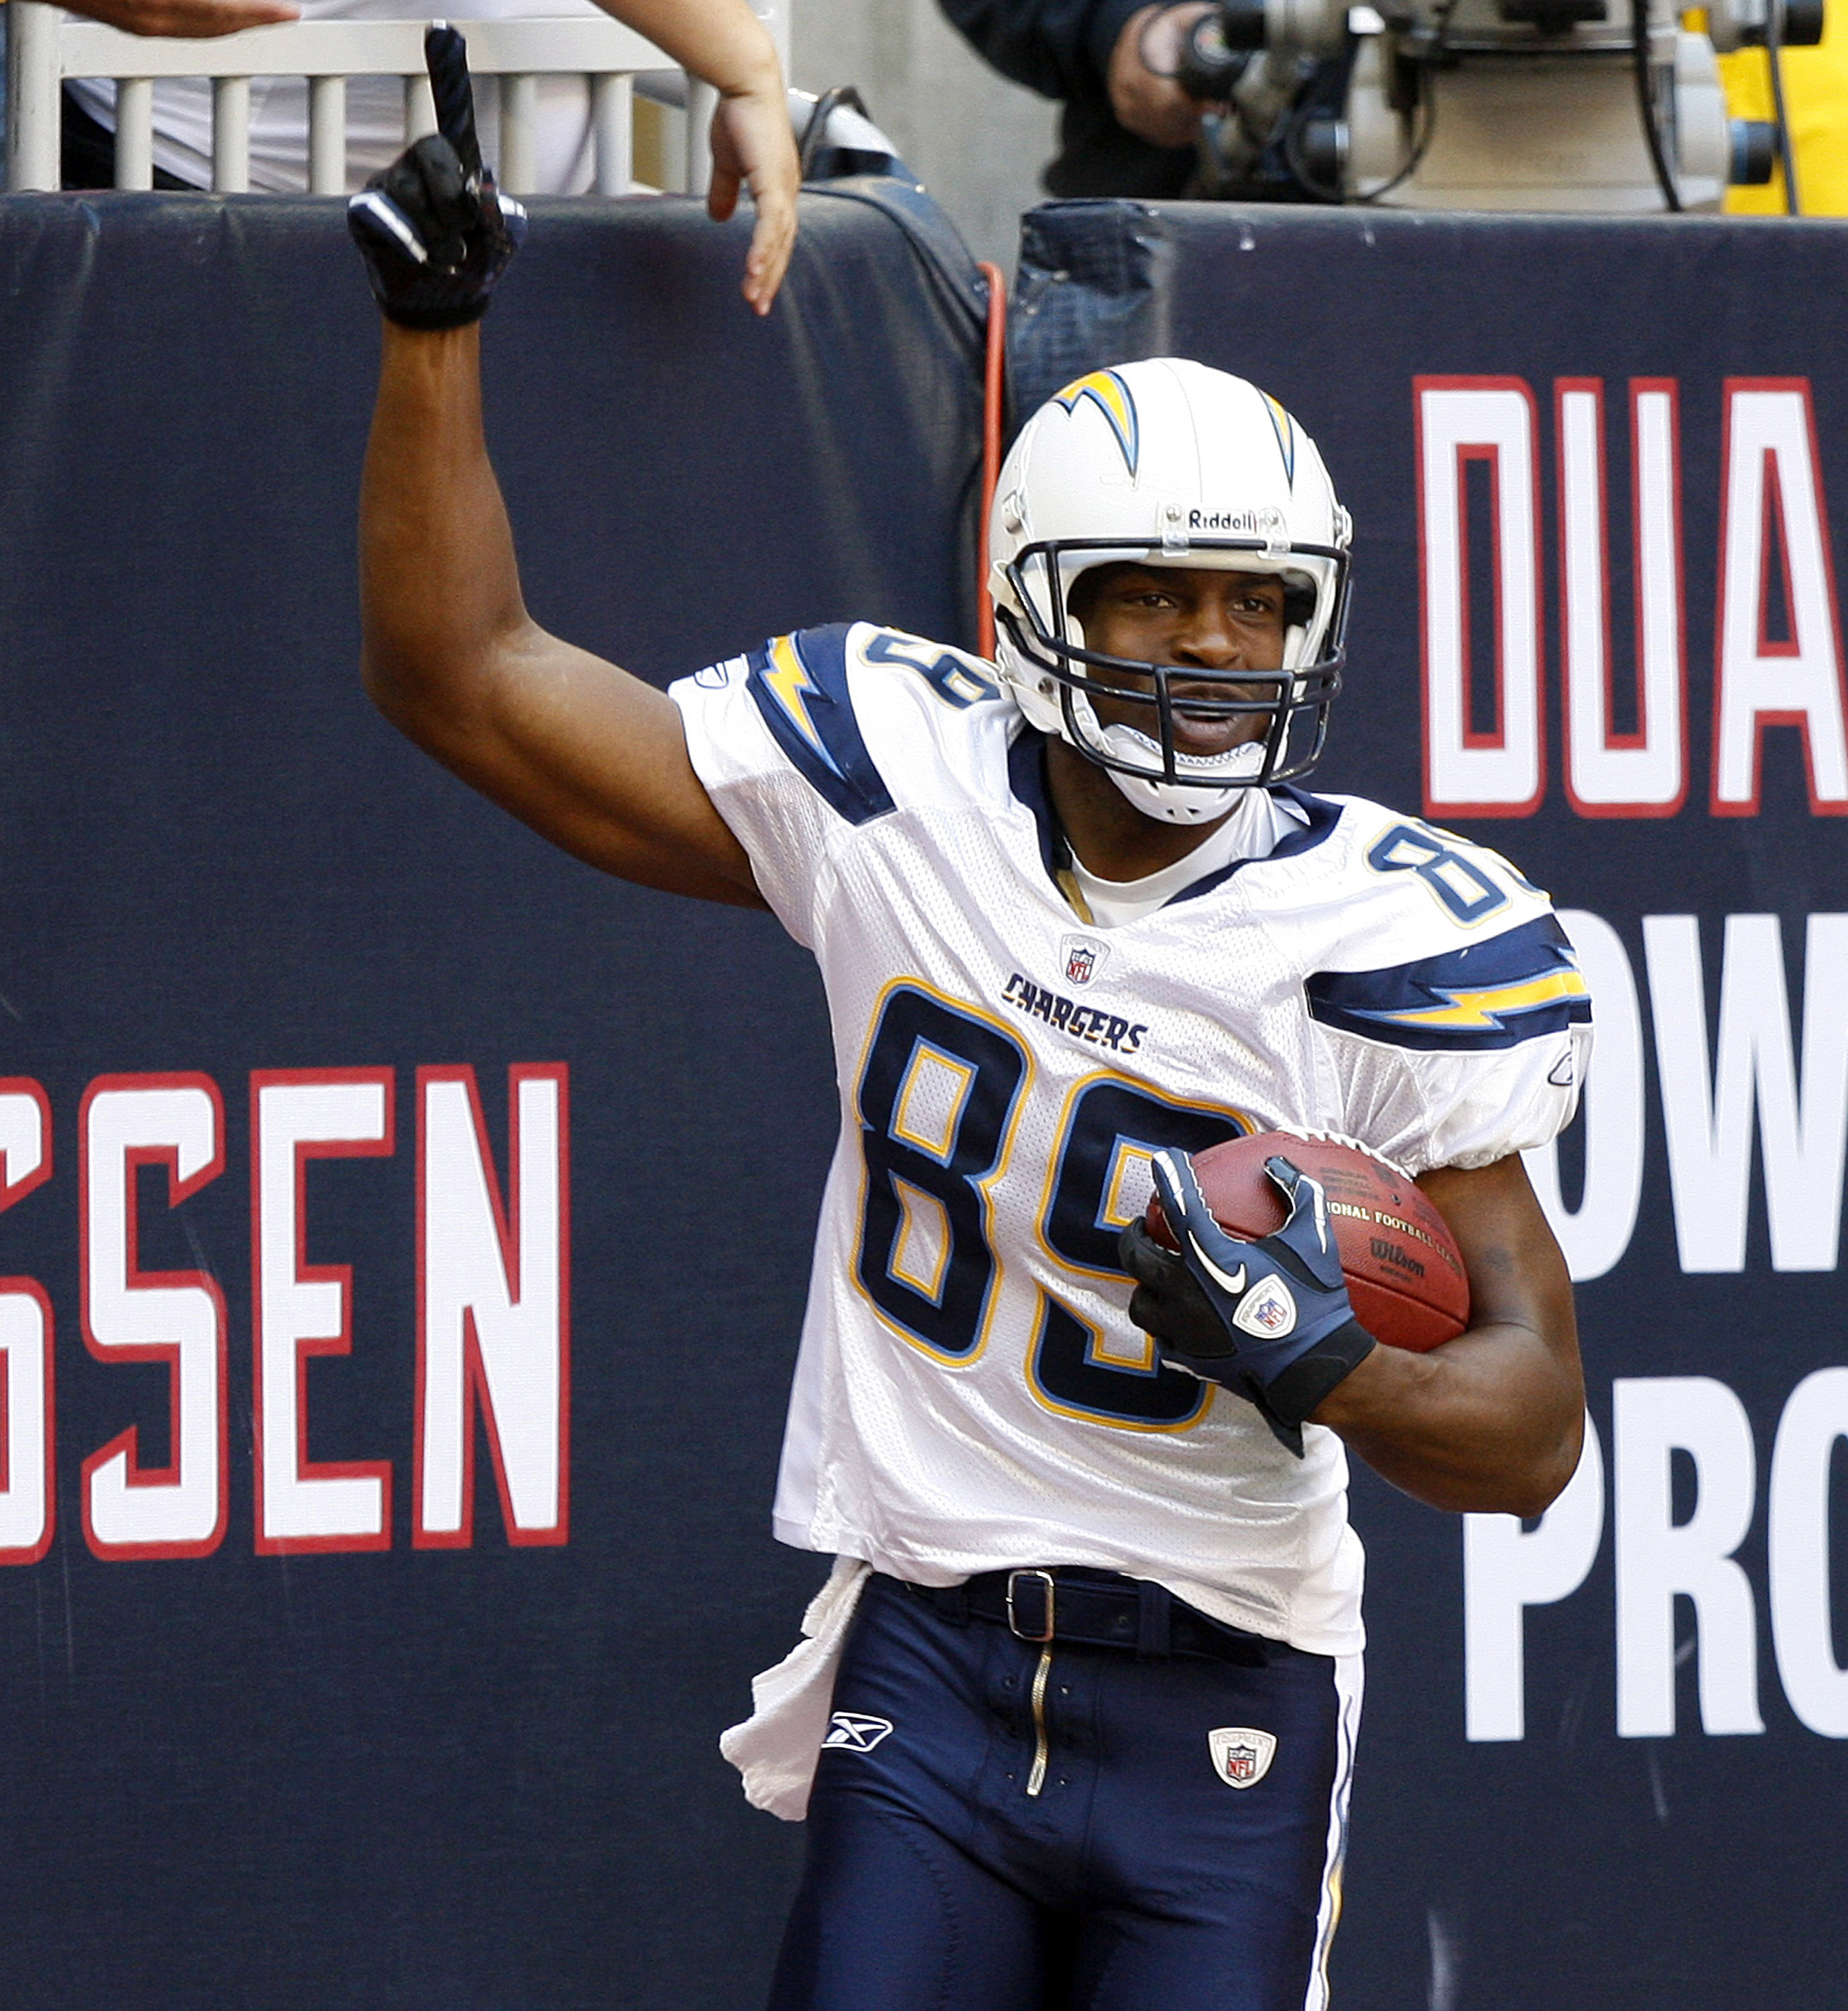 HOUSTON - NOVEMBER 07:  Wide receiver Seyi Ajirotutu #89 of the San Diego Chargers celebrates after a touchdown in the first quarter against the Houston Texans at Reliant Stadium on November 7, 2010 in Houston, Texas.  (Photo by Bob Levey/Getty Images)